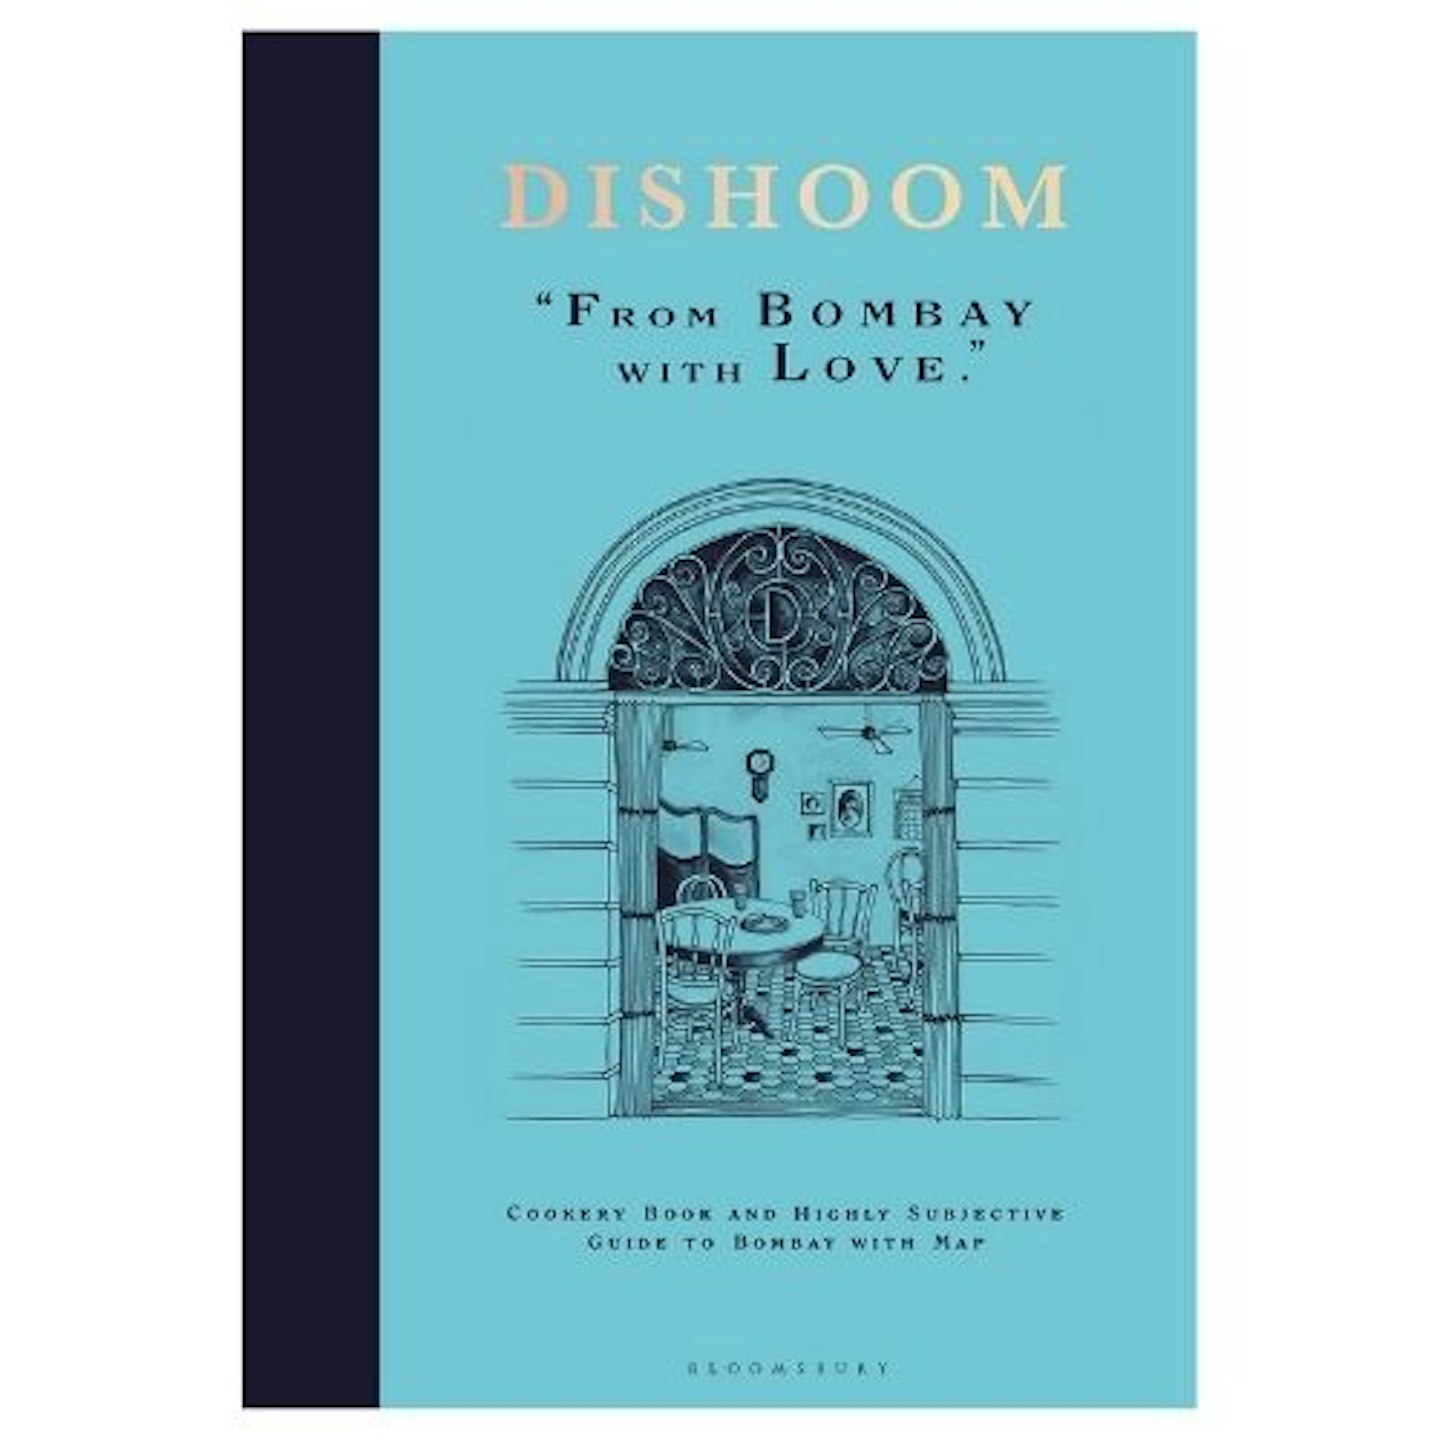 Dishoom: The first ever cookbook from the much-loved Indian